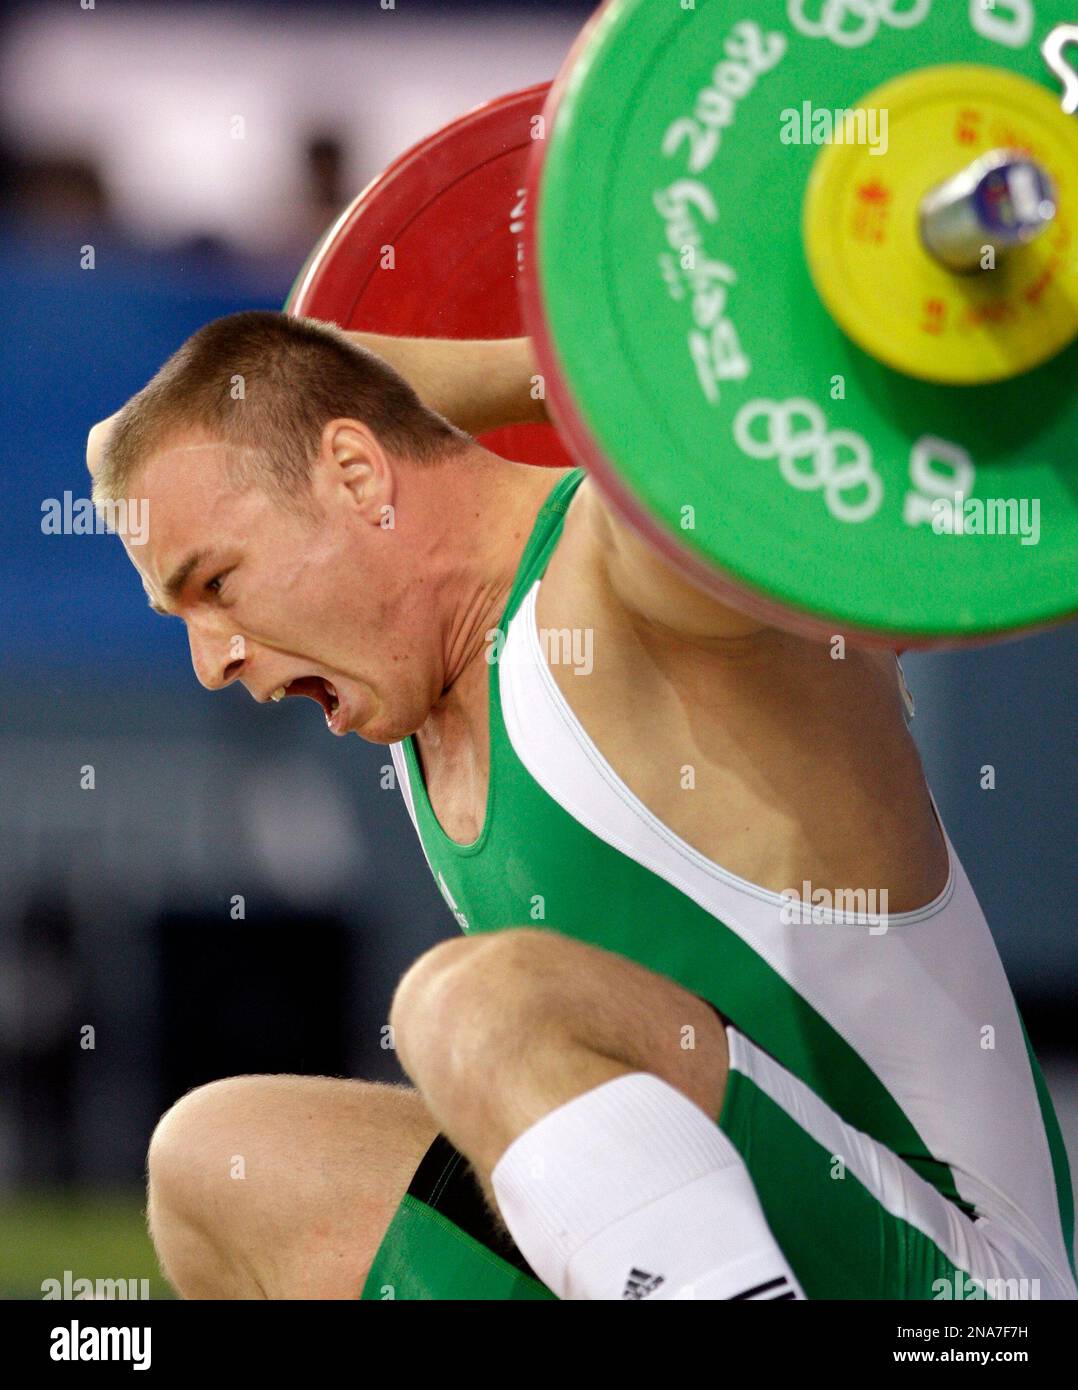 FILE - This is a Wednesday, Aug. 13, 2008 file photo of Janos Baranyai, of Hungary, loses control of the barbell twisting his right arm during competition in the Group B of the men's 77 kilogram of the weightlifting at the Beijing 2008 Olympics in Beijing. Baranyai had to be removed from the platform on a stretcher. Images of Janos Baranyai dislocating his elbow at the 2008 Olympic Games have been viewed over 15 million times on YouTube, but the weightlifter has only seen video of the injury twice. Baranyai's right elbow popped out of its socket as he was attempting to snatch 148 kilograms (32 Stock Photo